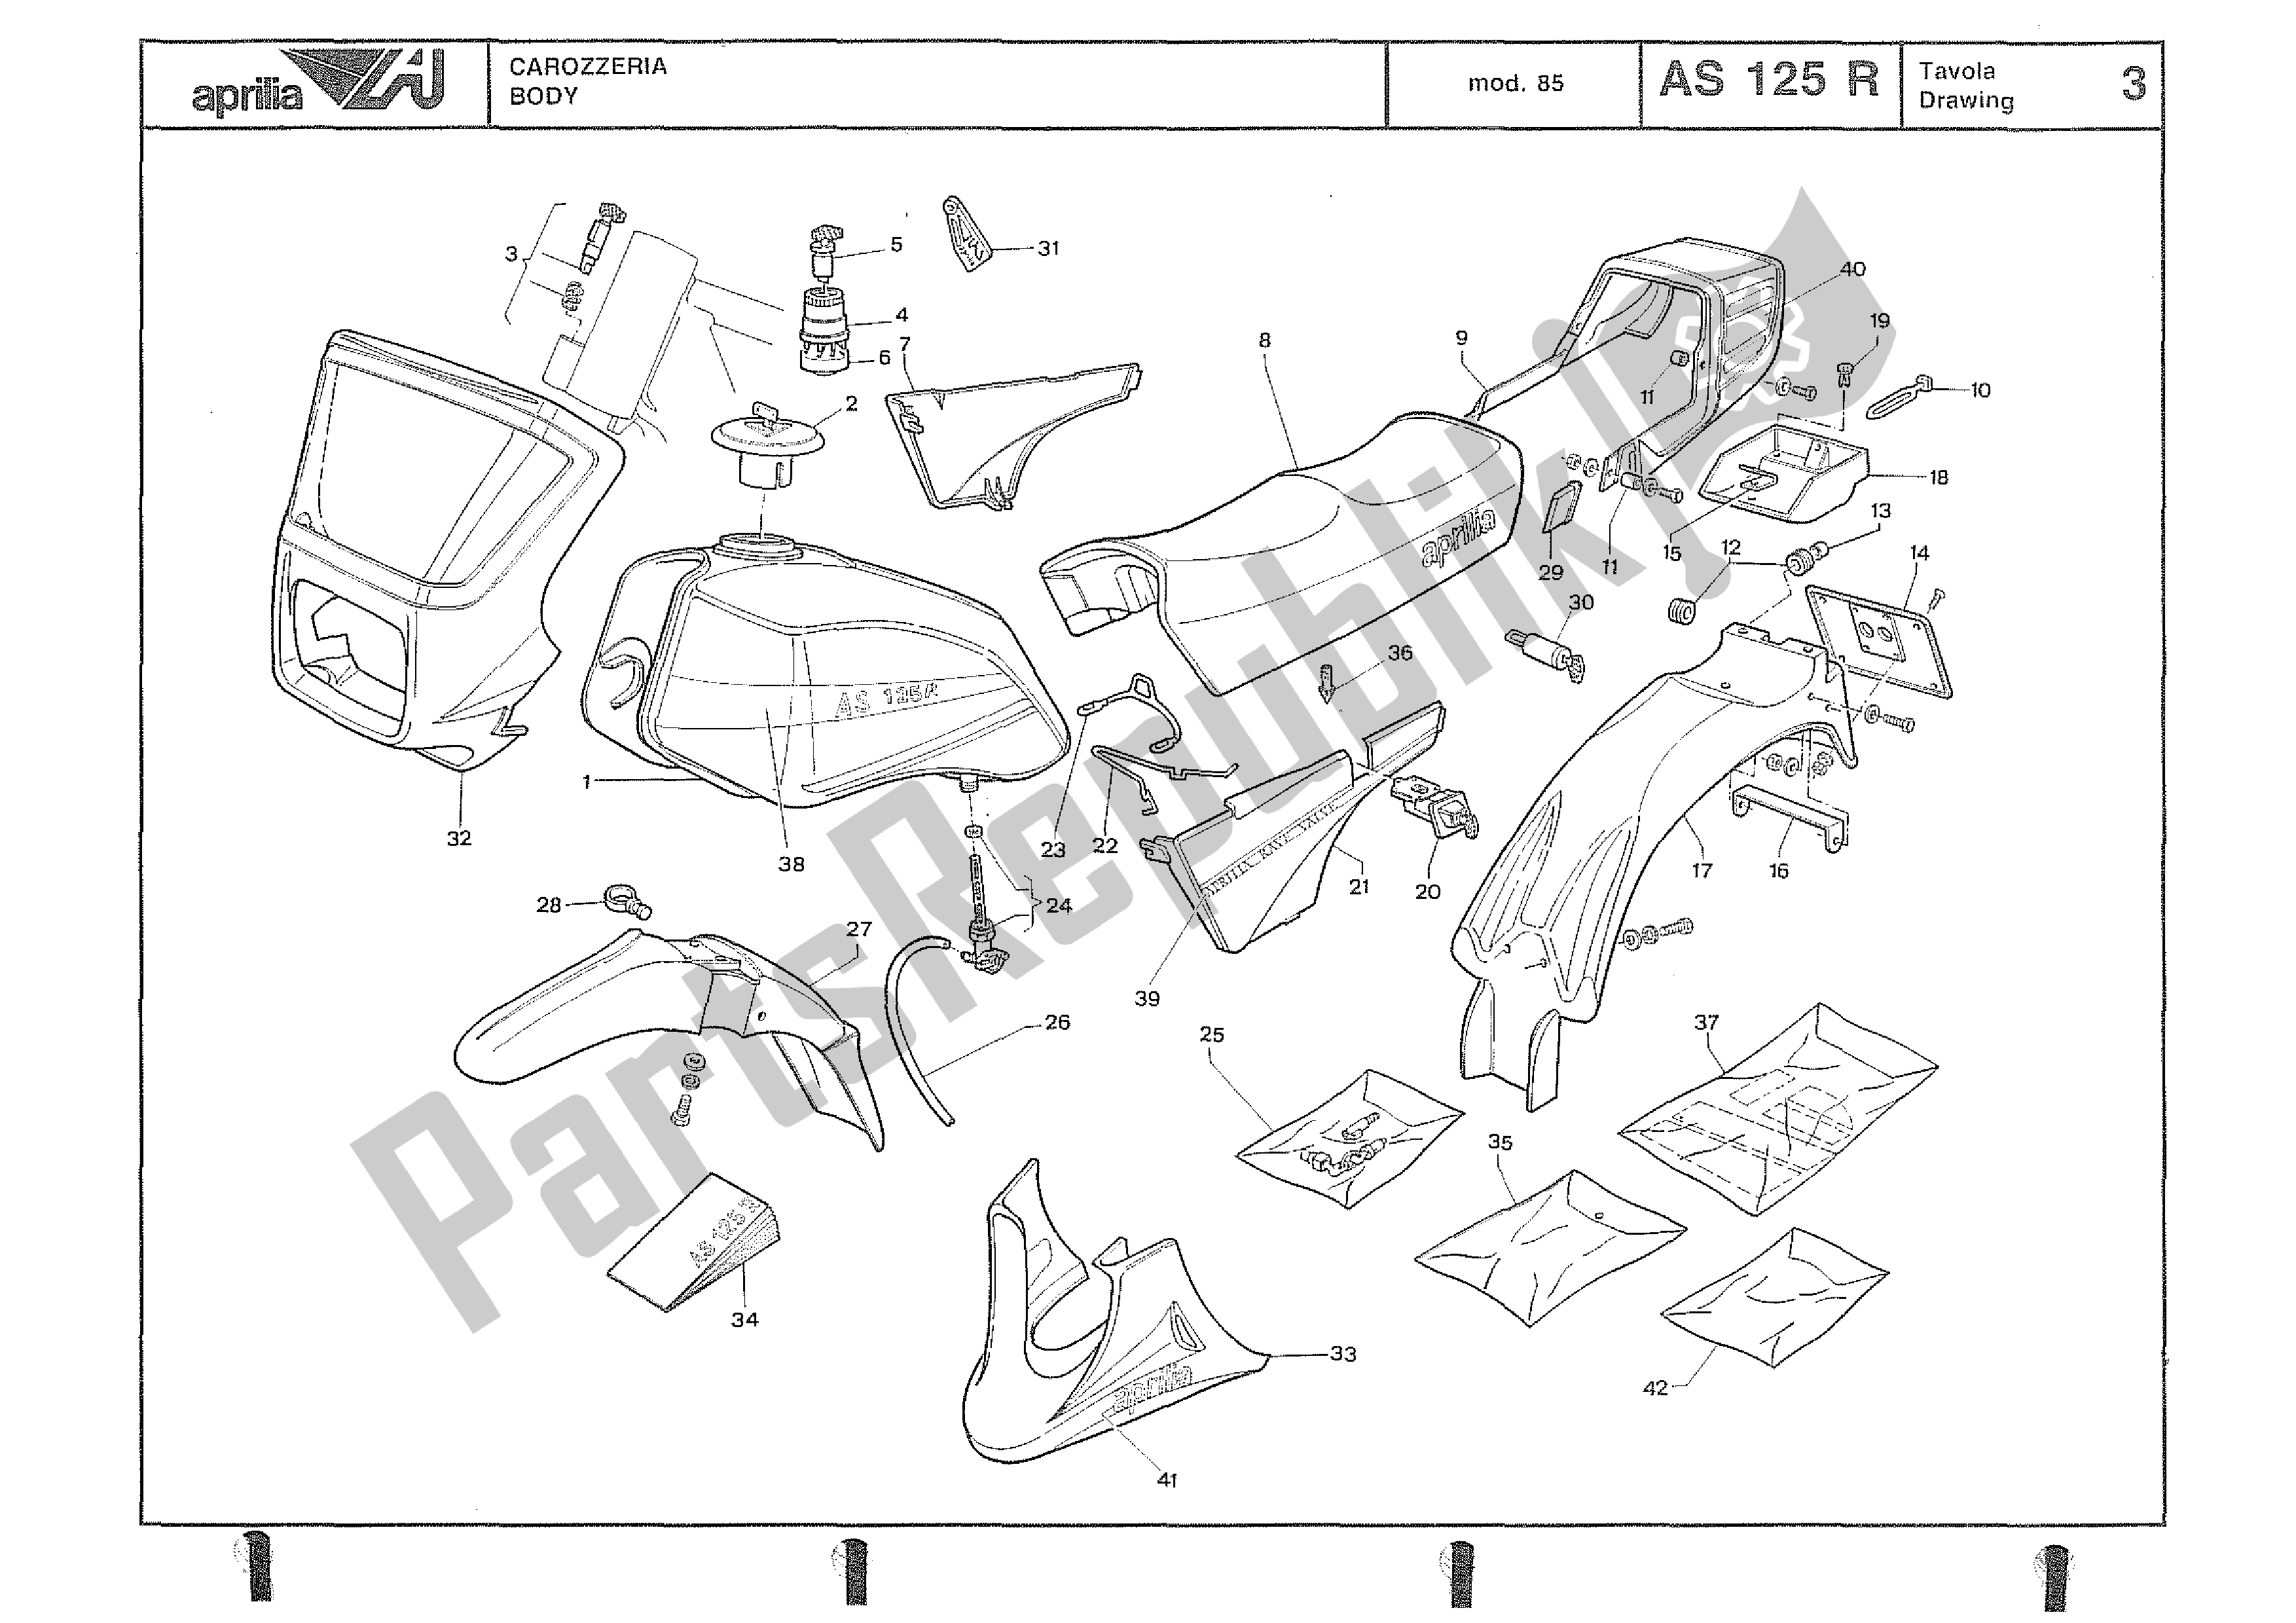 All parts for the Body of the Aprilia AS 125 R 1985 - 1987